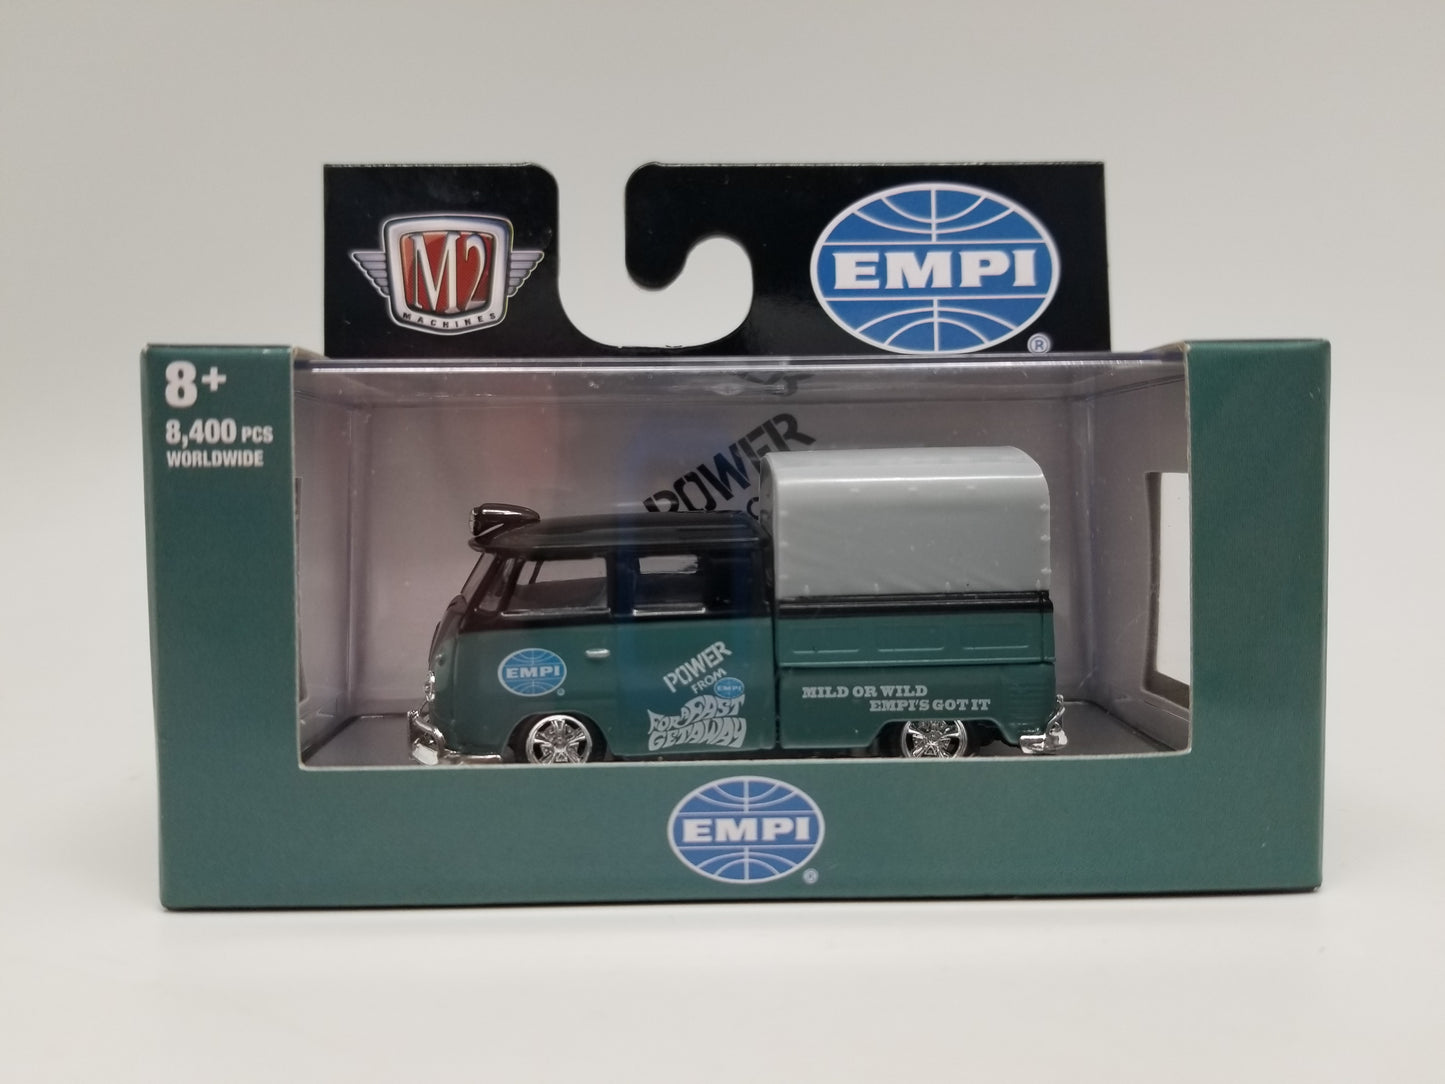 M2 1959 VW Double Cab Truck - EMPI